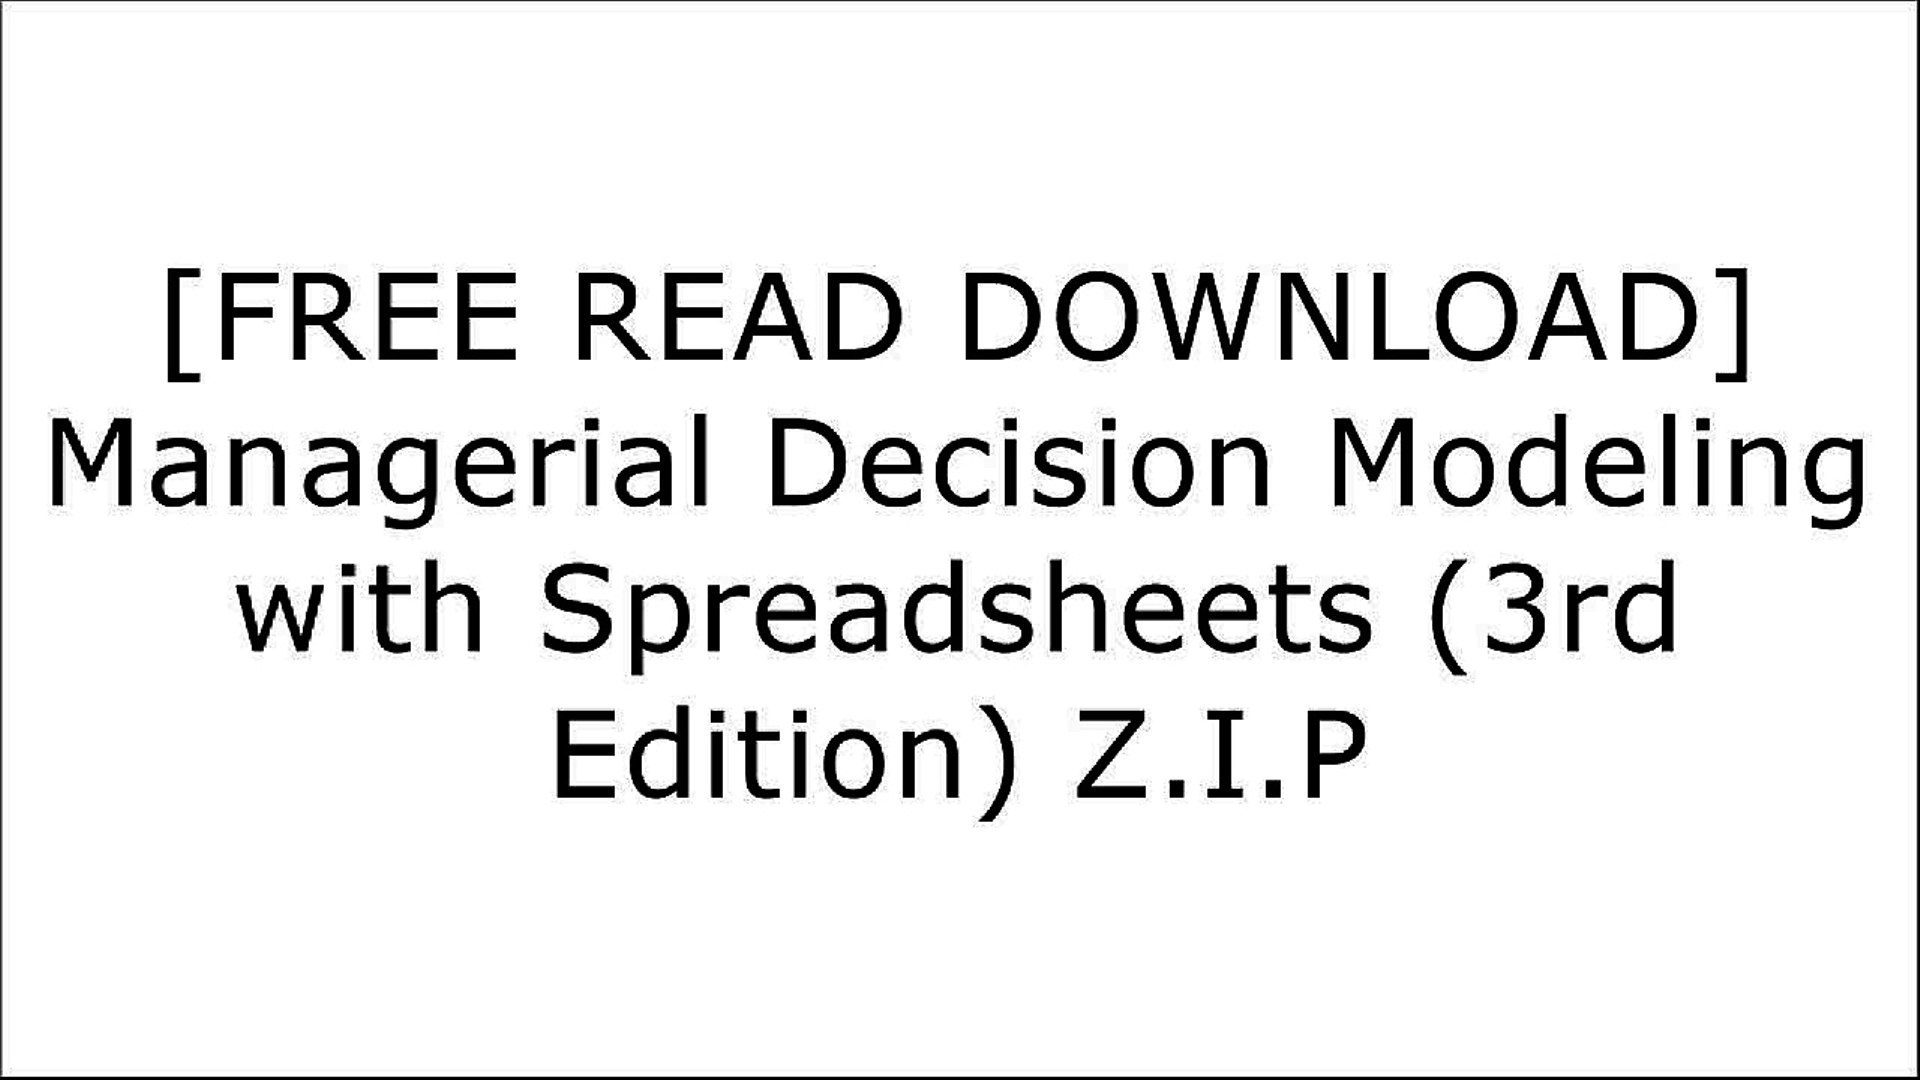 Managerial Decision Modeling With Spreadsheets 3Rd Edition Pdf Free Pertaining To Zr4Bx.[F.r.e.e] [R.e.a.d] [D.o.w.n.l.o.a.d]] Managerial Decision